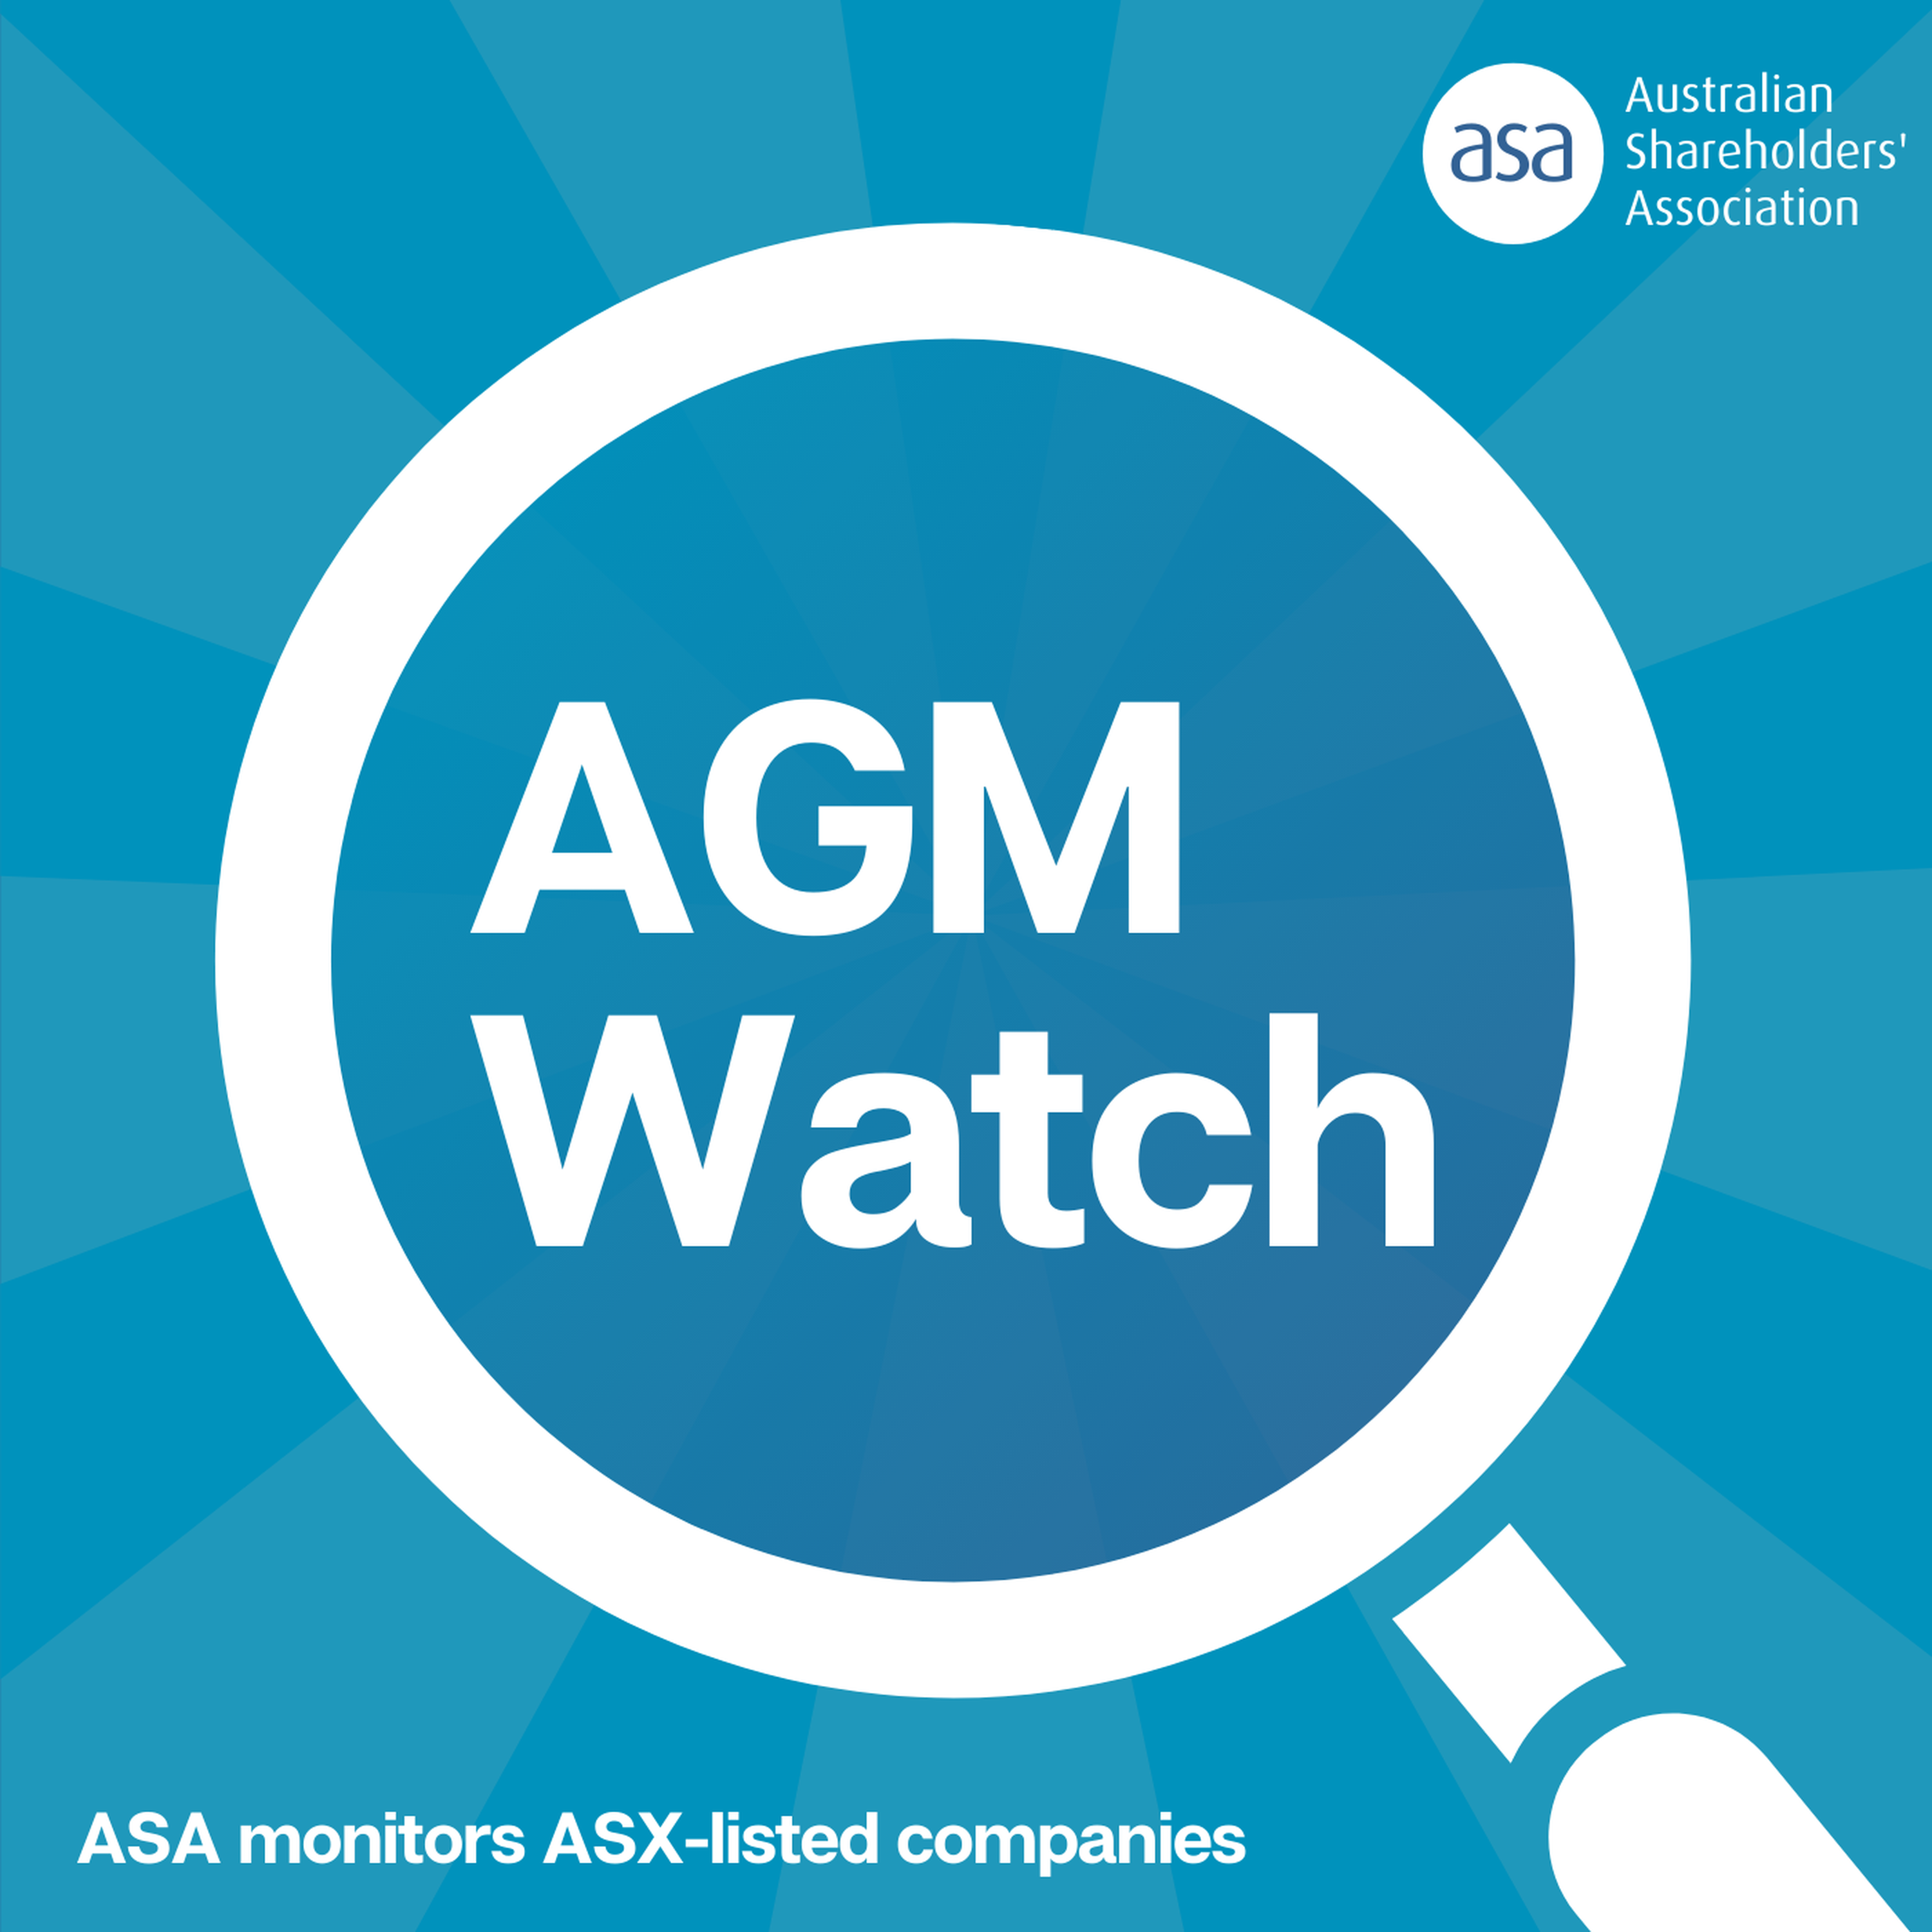 AGM Watch - South32